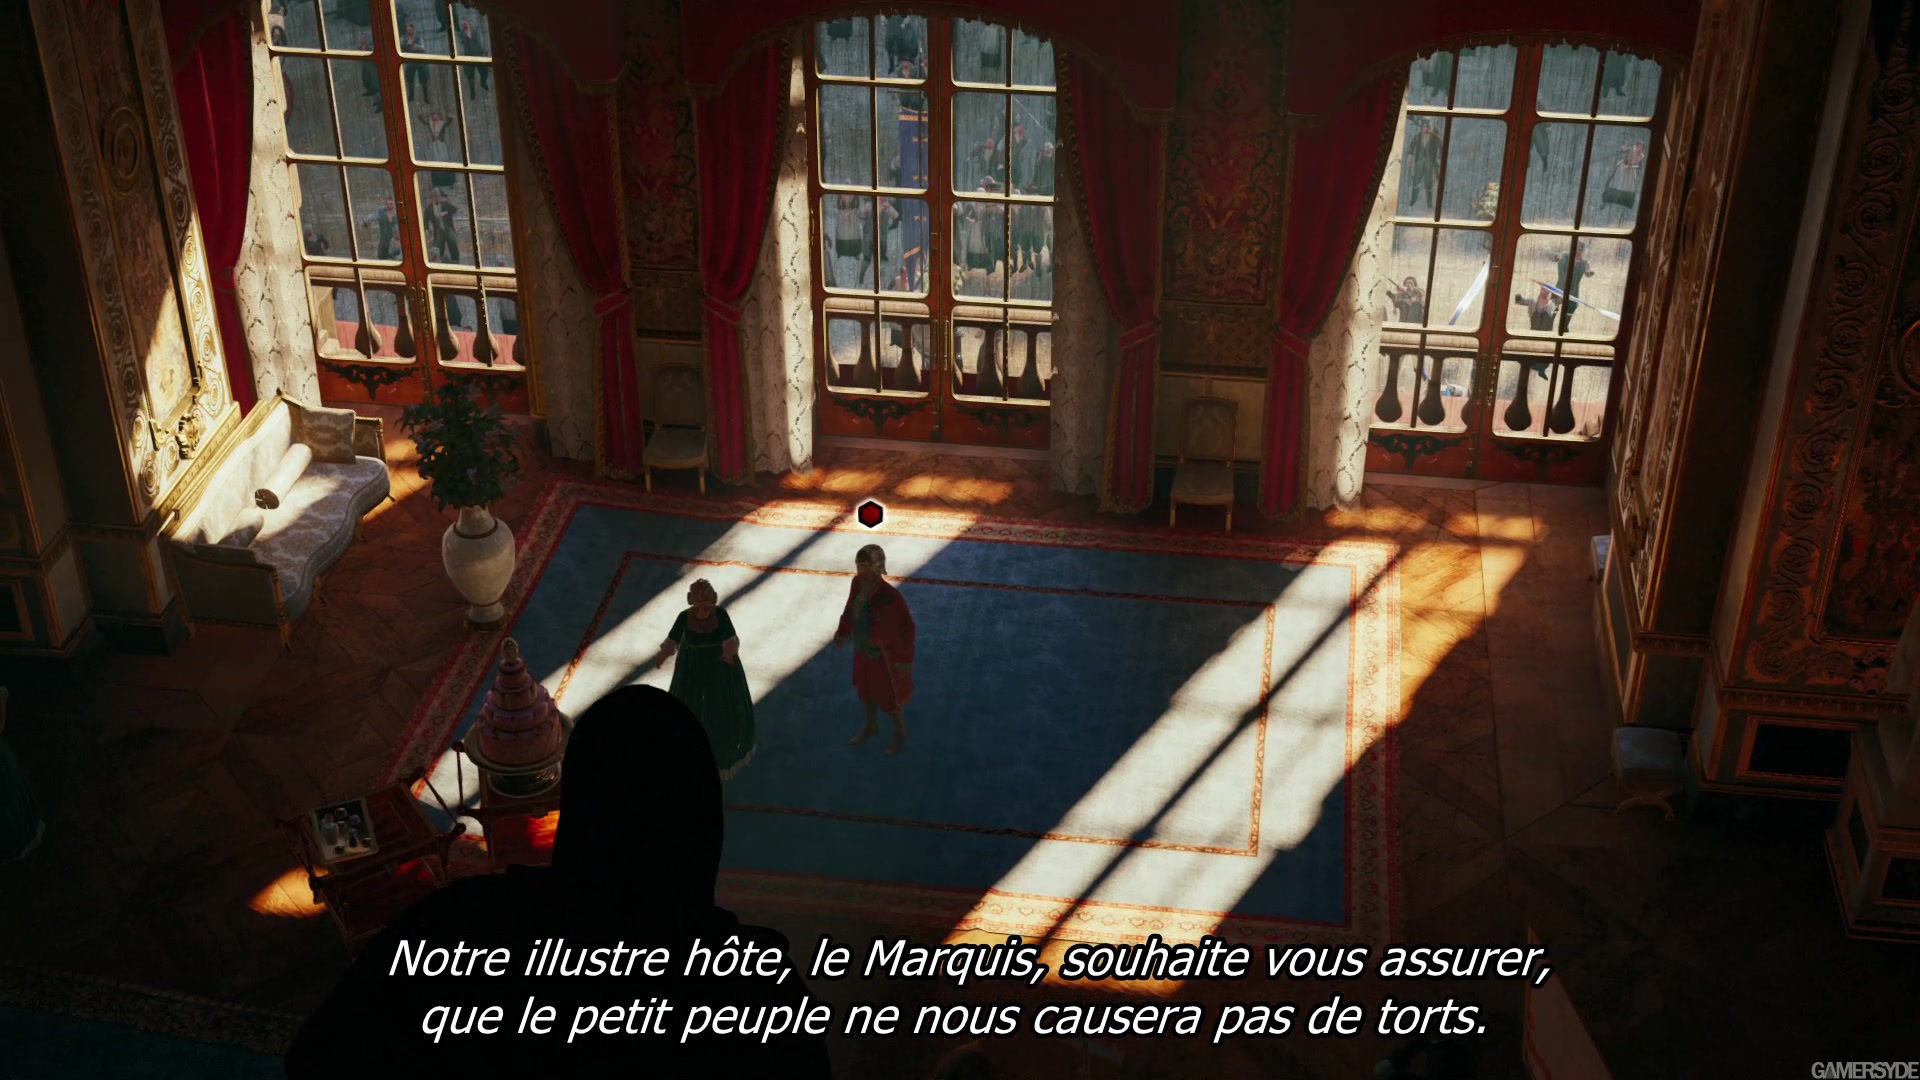 http://images.gamersyde.com/image_assassin_s_creed_unity-25265-2908_0022.jpg